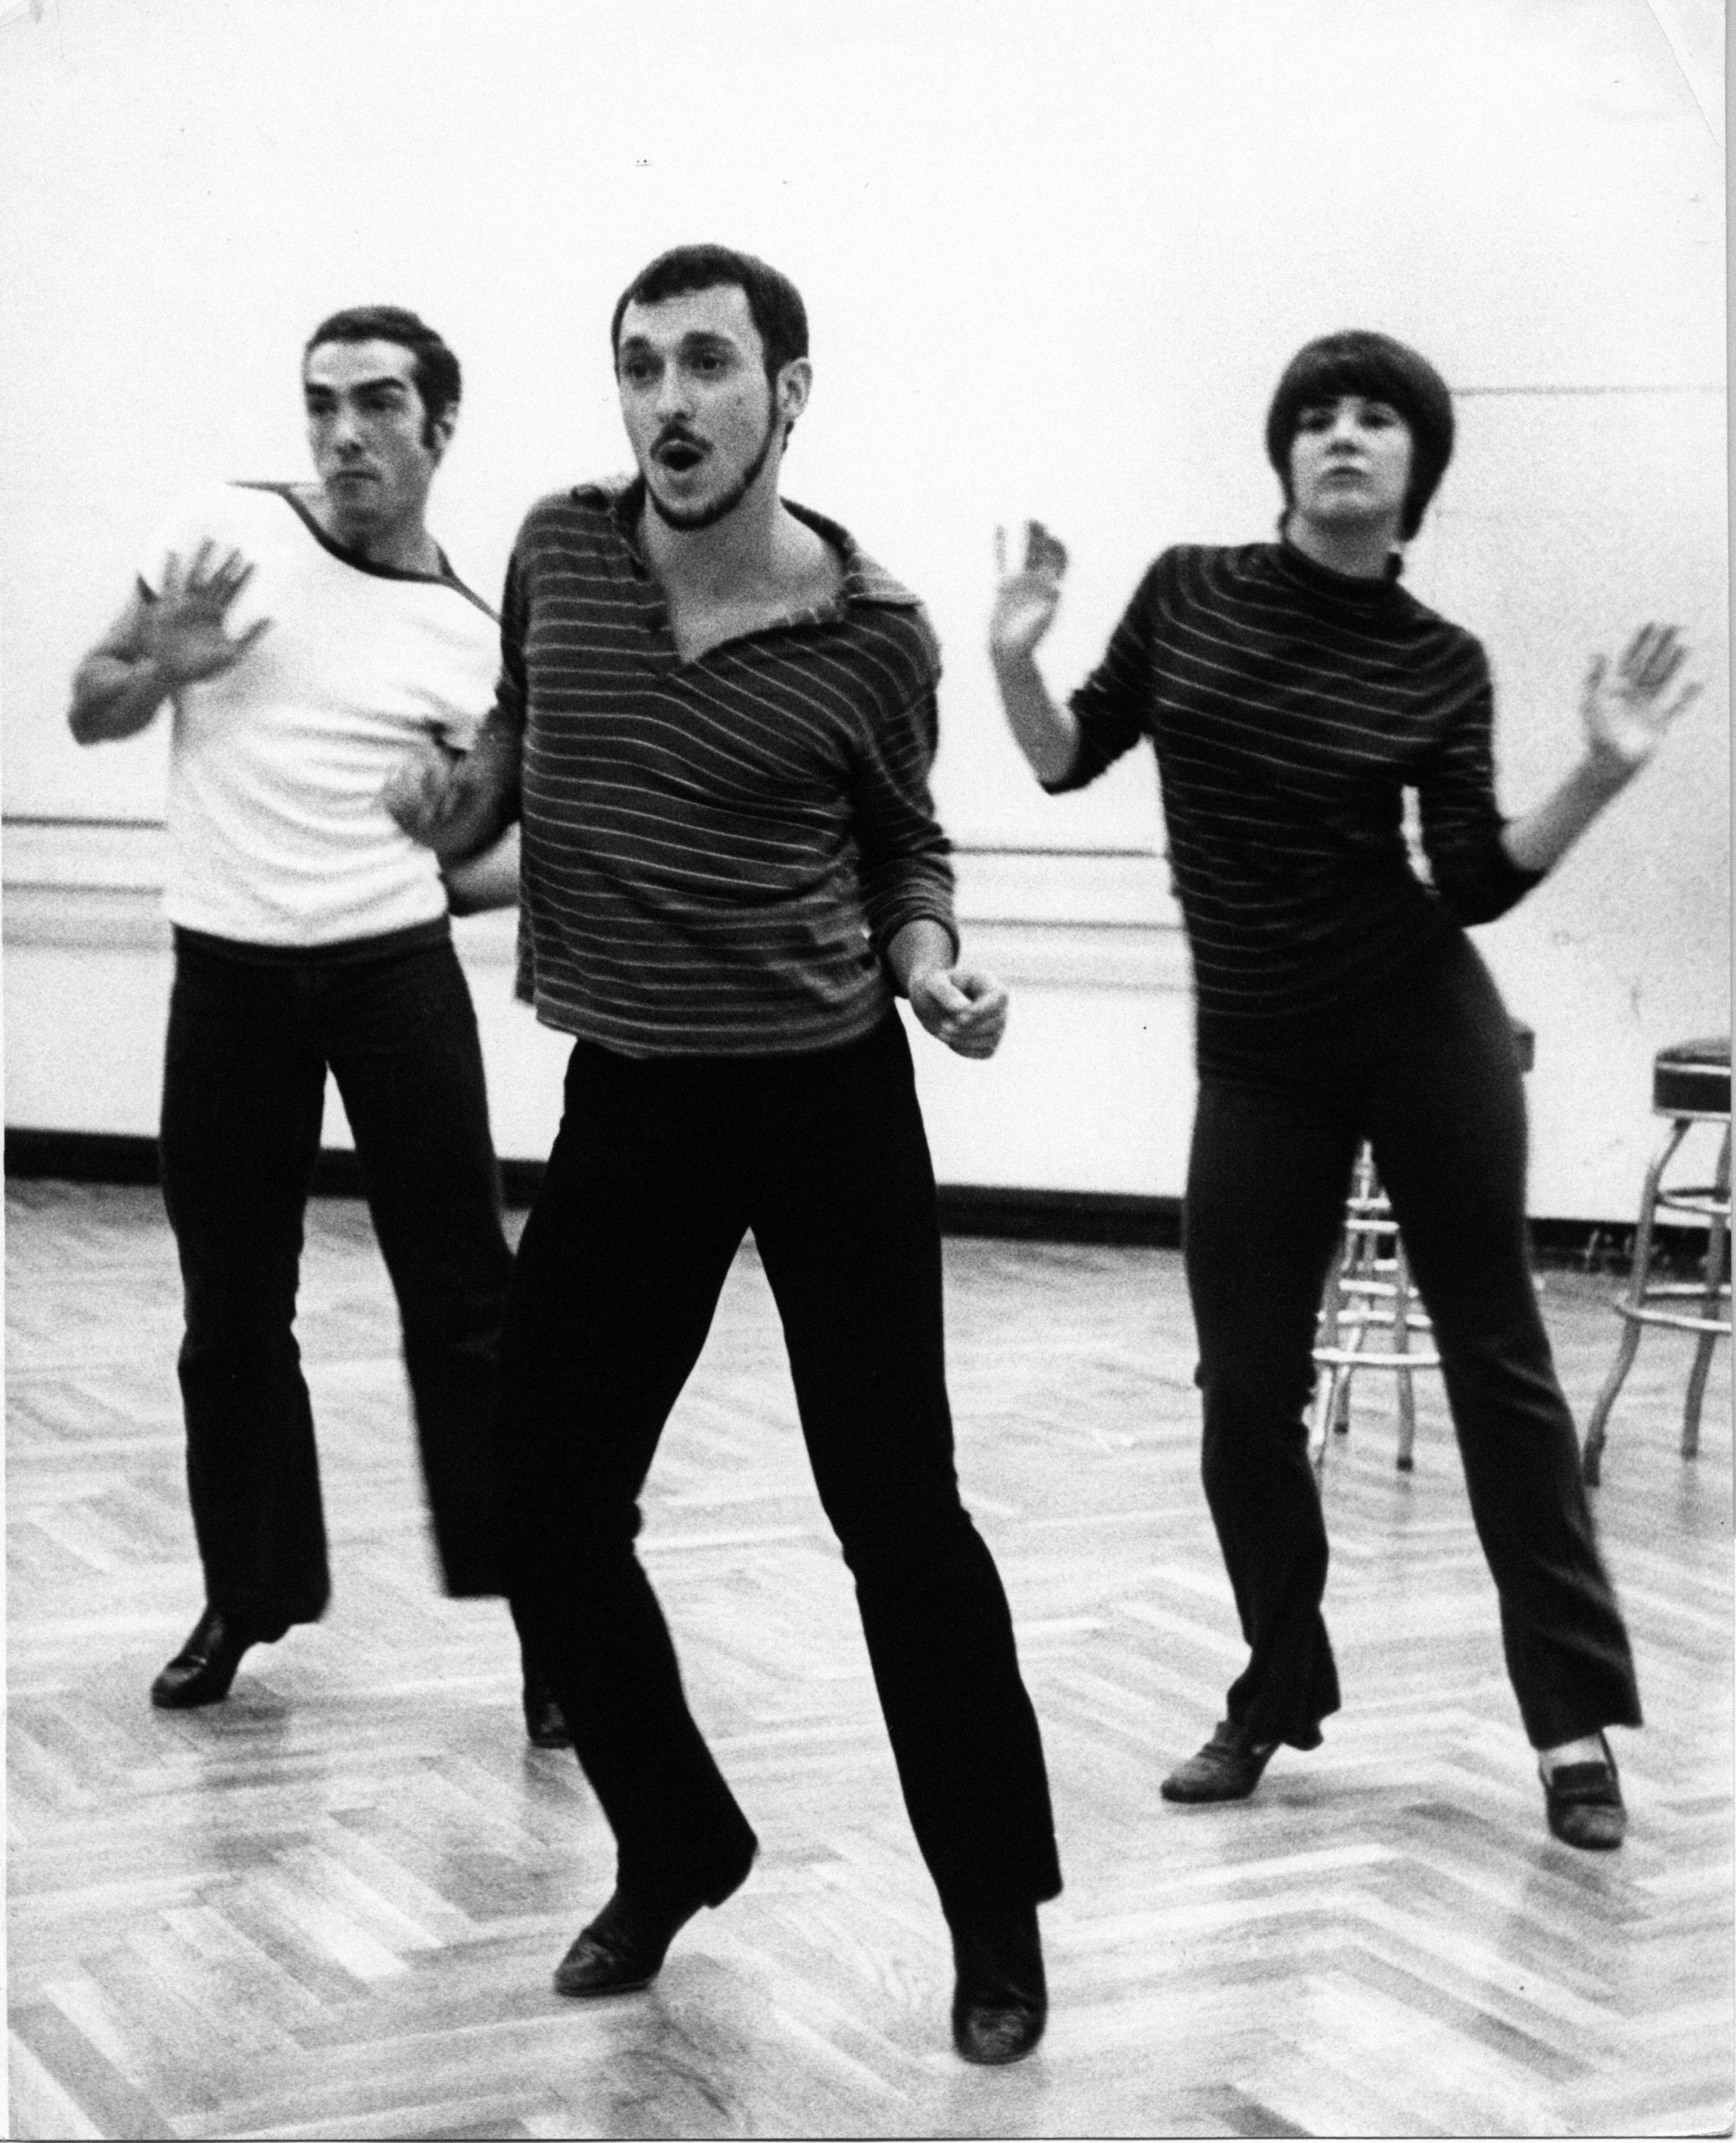 Michael Bennett, Bob Avian and Margo Sappington stand in a triangle in the middle of a dance studio. Their hips are jutted to the site, caught mid-bounce by the camera. Photo is black and white.